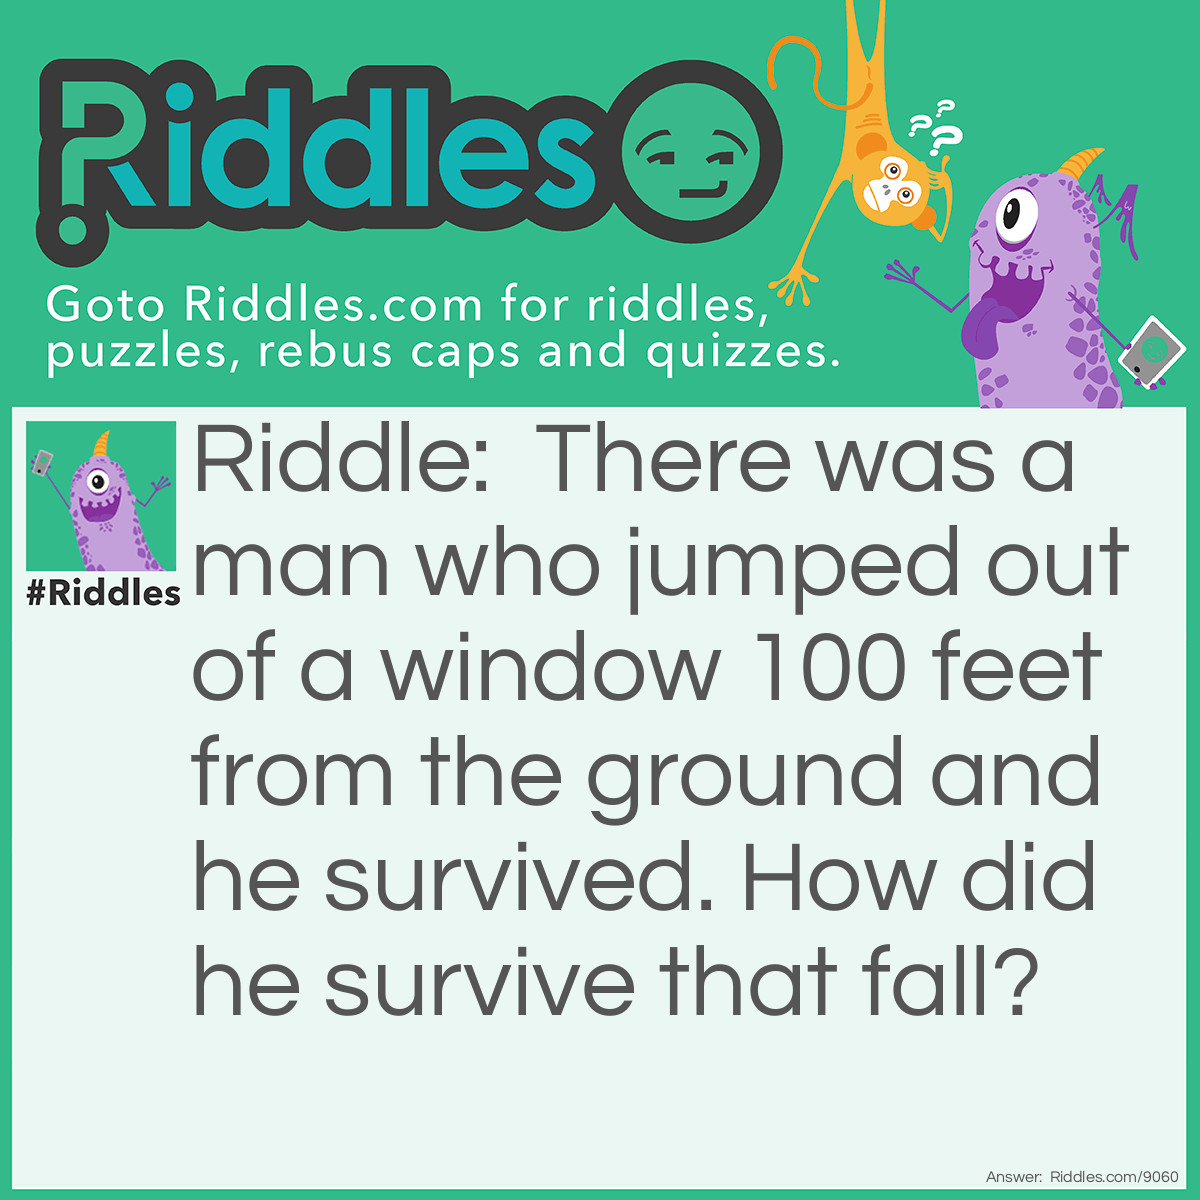 Riddle: There was a man who jumped out of a window 100 feet from the ground and he survived. How did he survive that fall? Answer: He had a parachute.